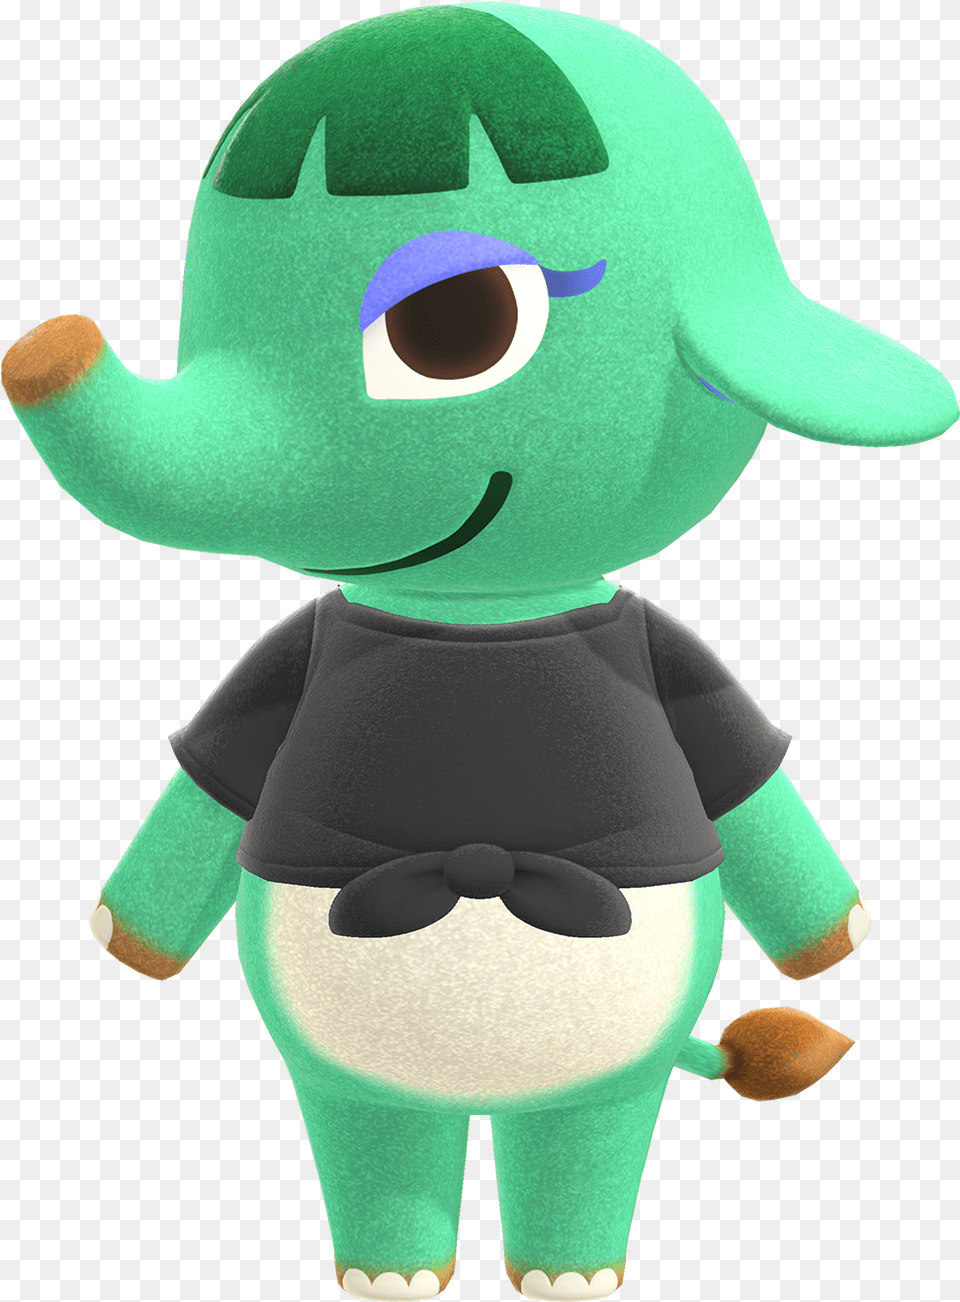 Opal Animal Crossing Wiki Nookipedia Animal Crossing Femal Characters, Plush, Toy, Mascot Free Png